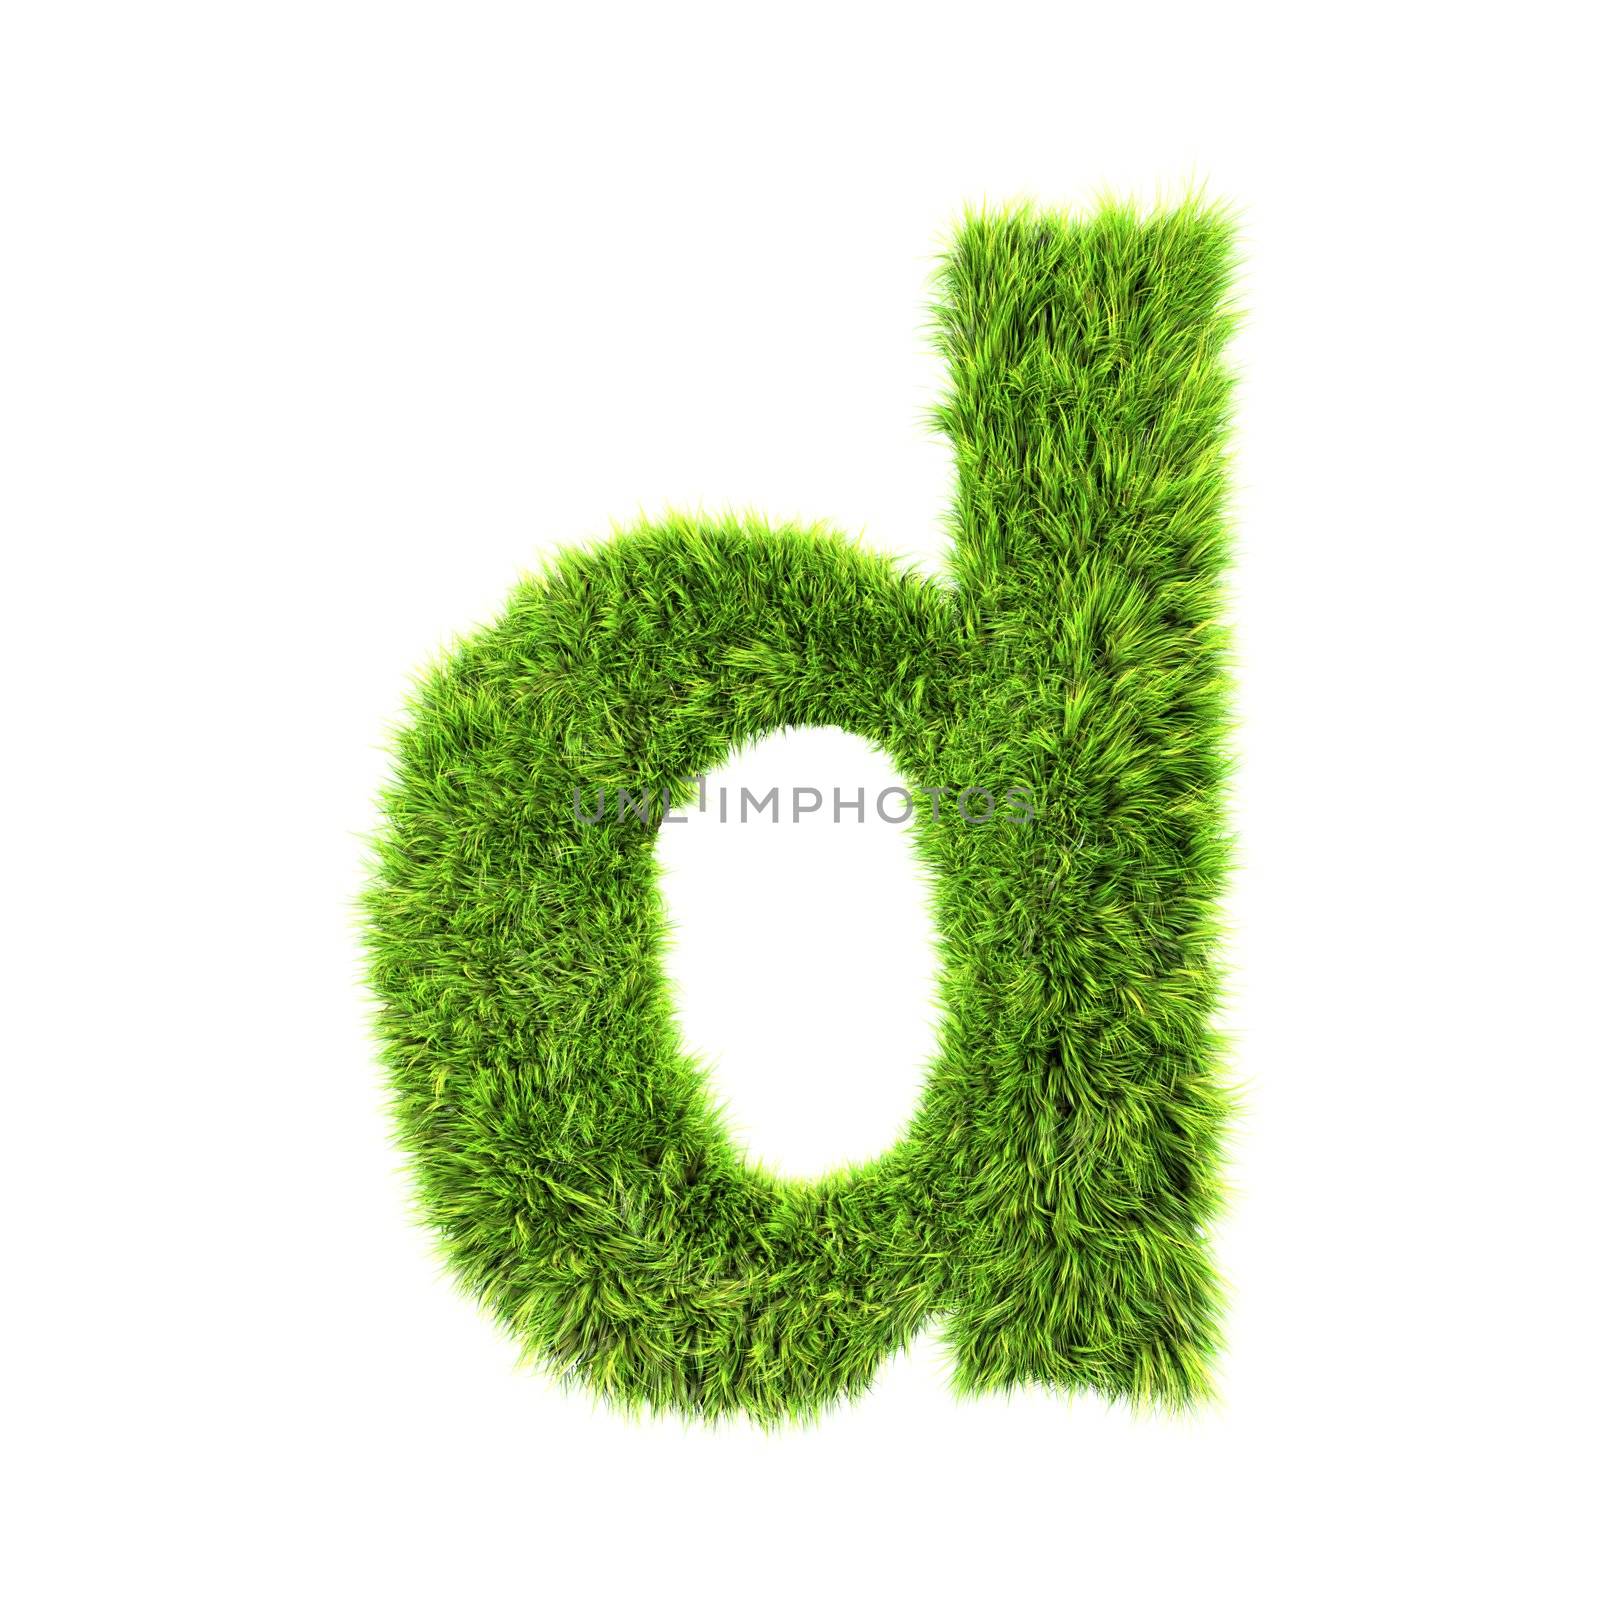 3d grass letter isolated on white background - d by chrisroll